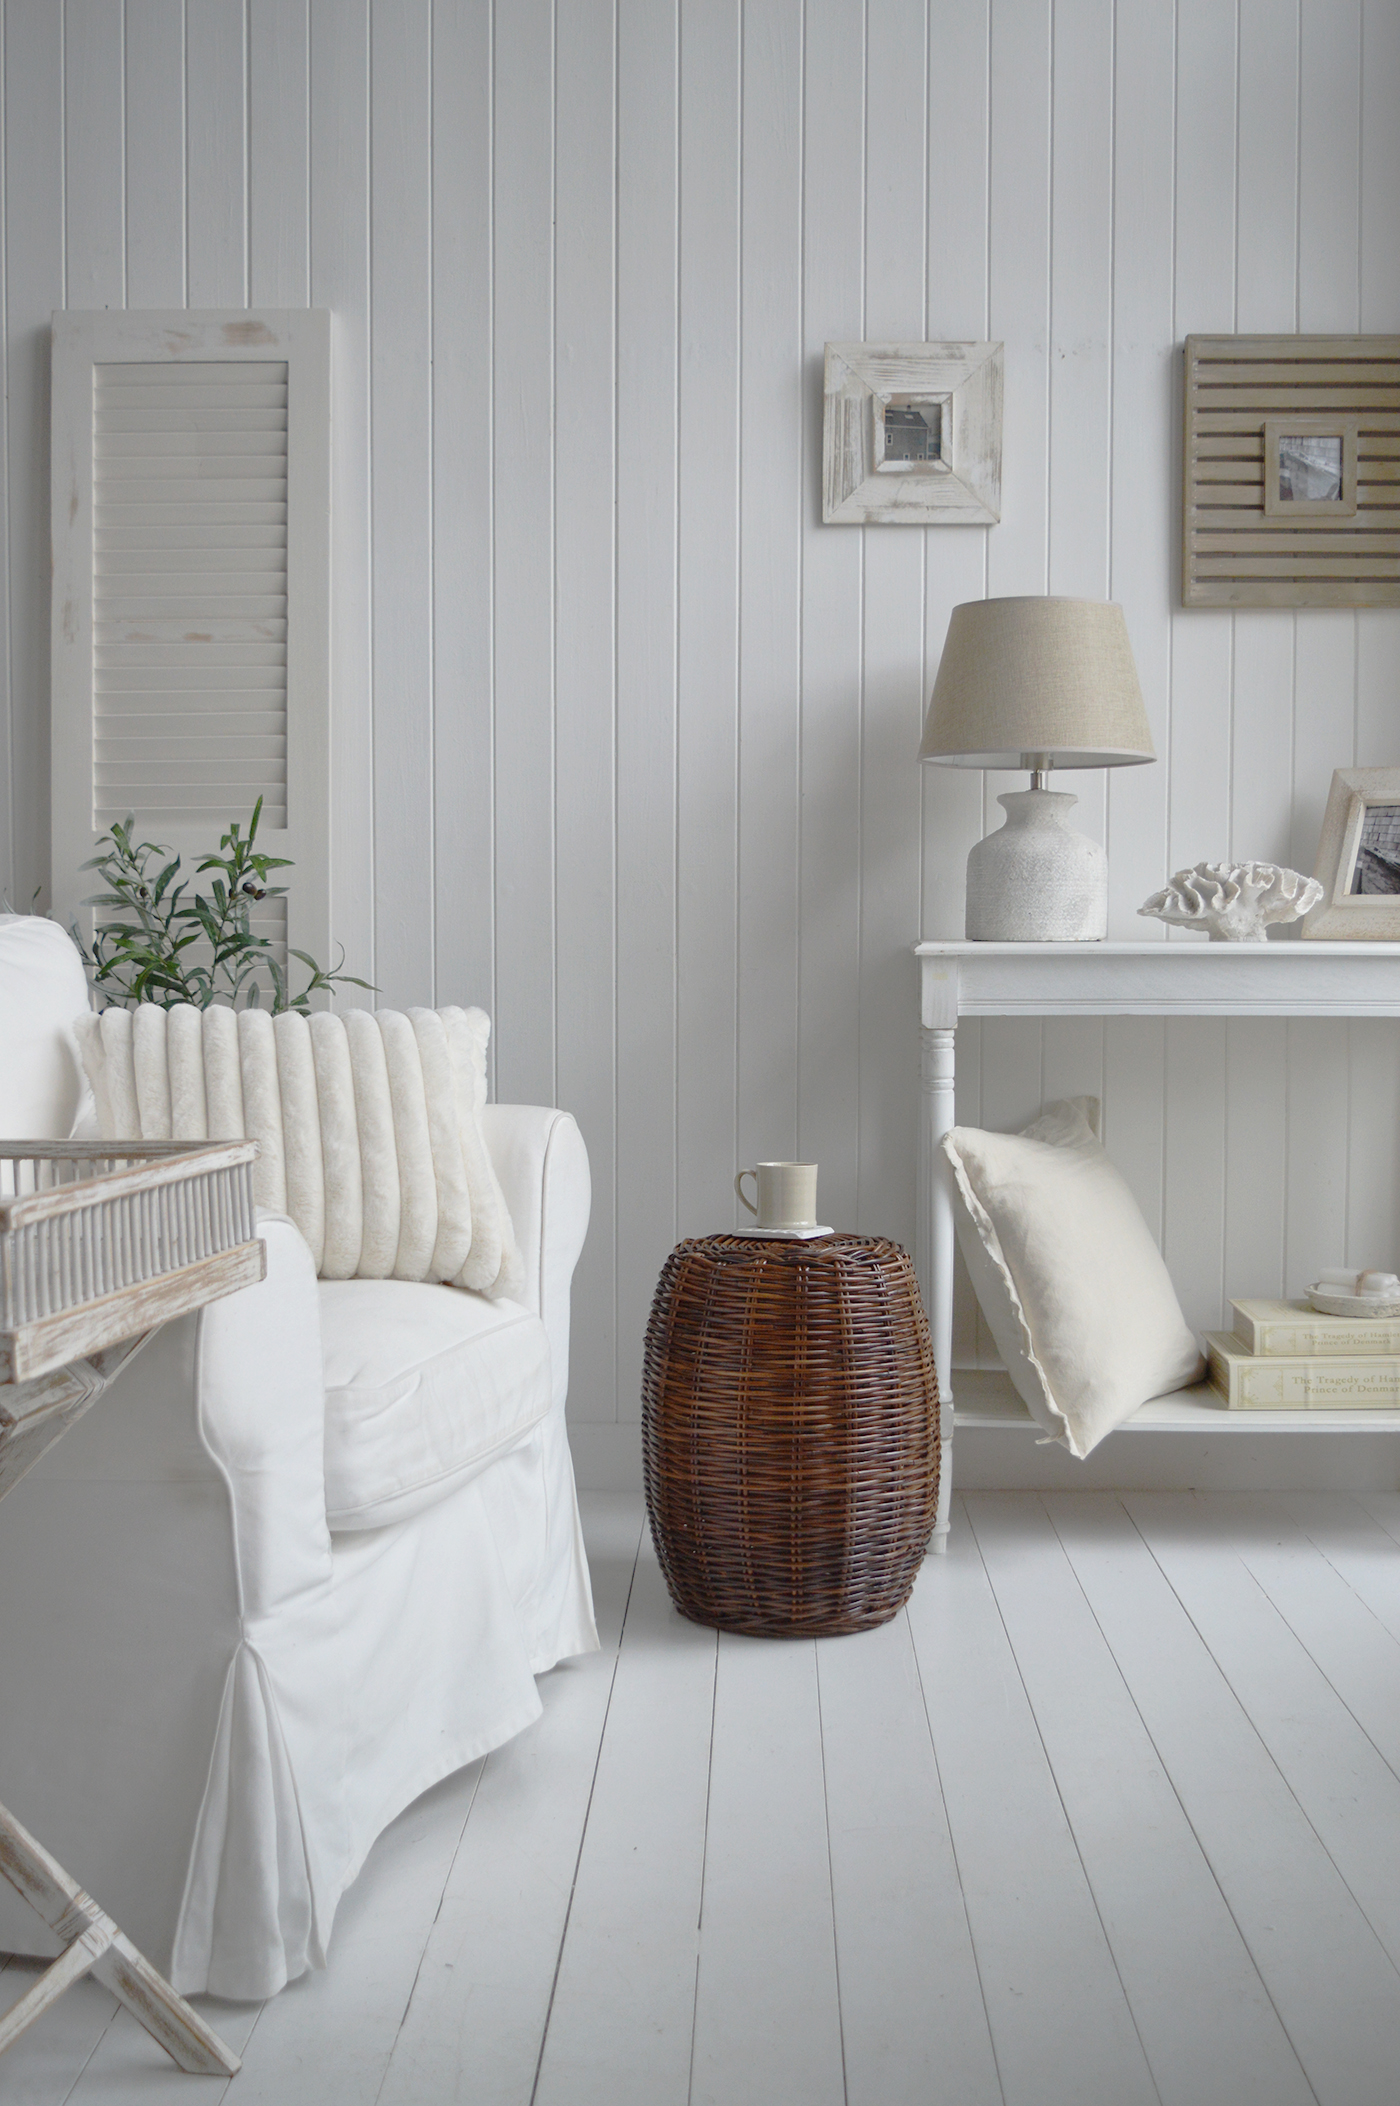 The Cove bay rattan stool as a side table, shown with a coaster and cup in this beach house style coastal setting